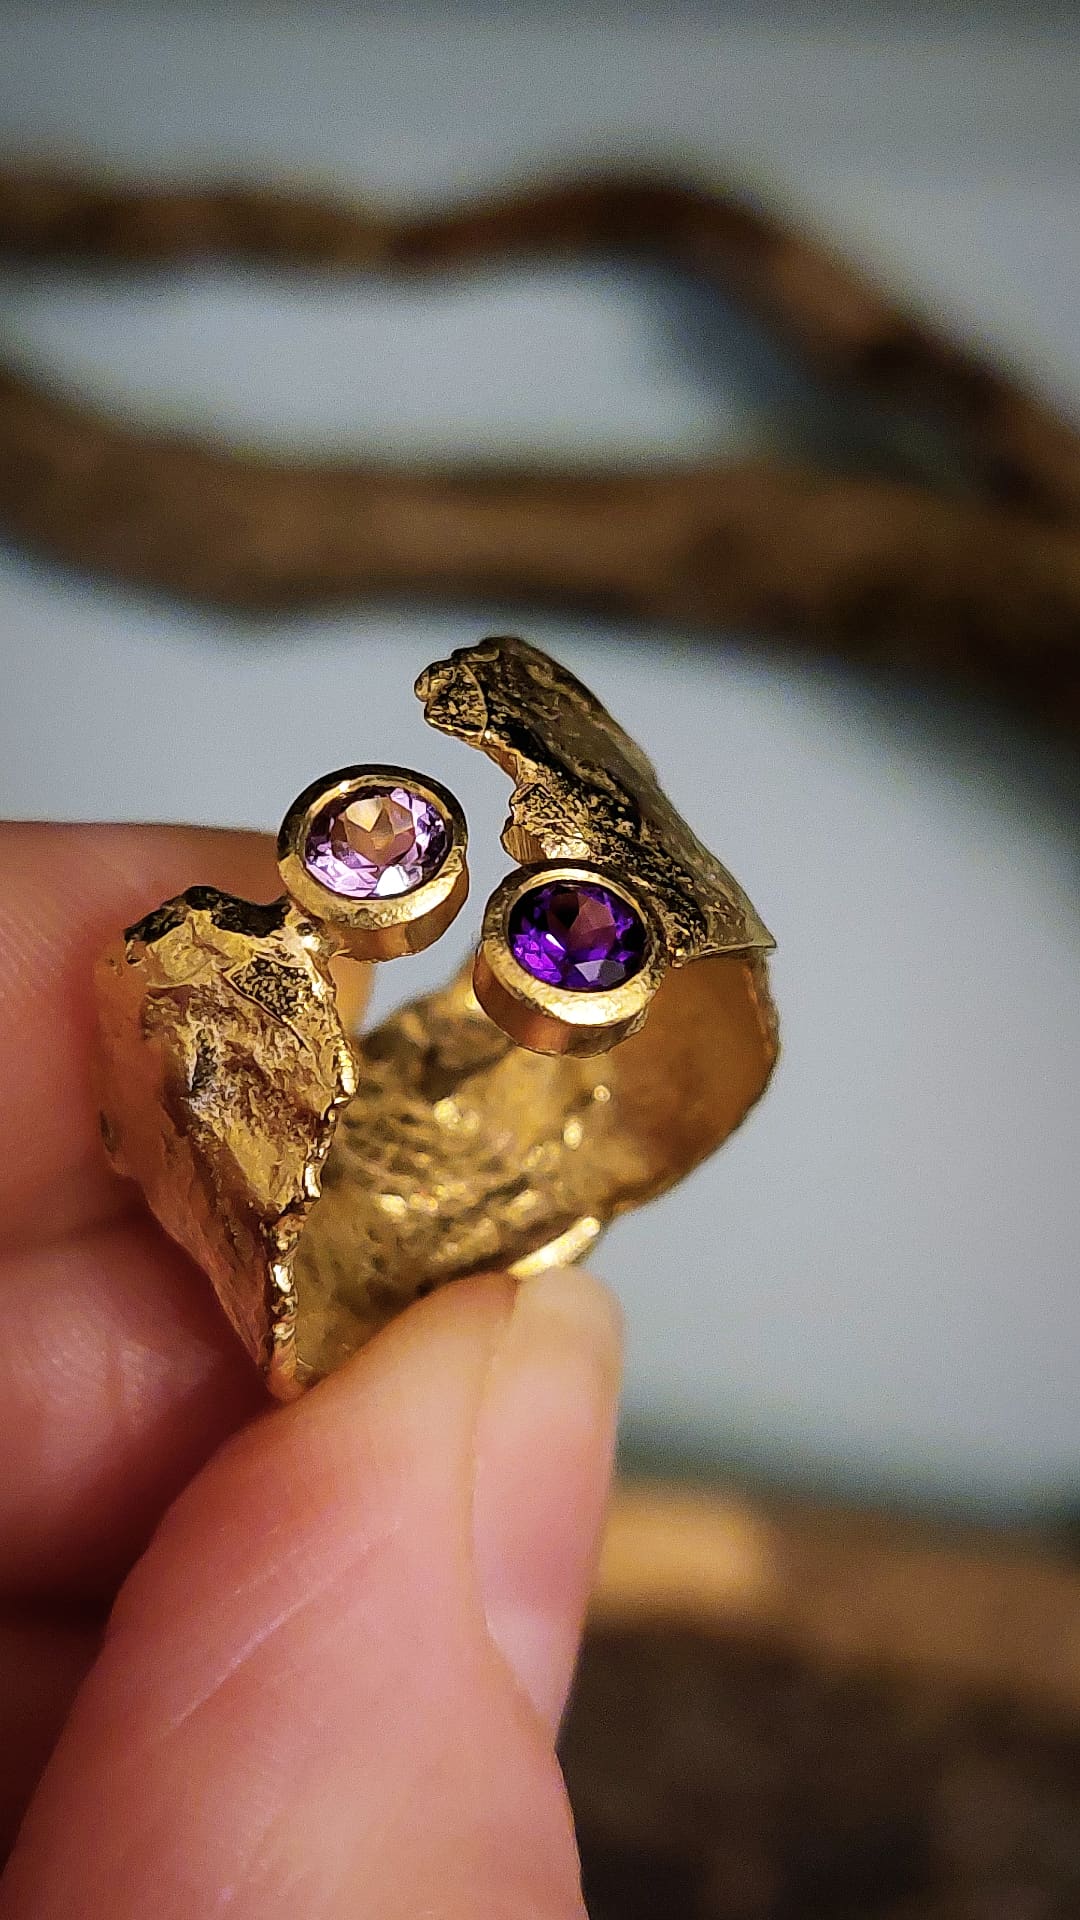 Two Shades of Amethyst & Gold Faerie Tale Ring.